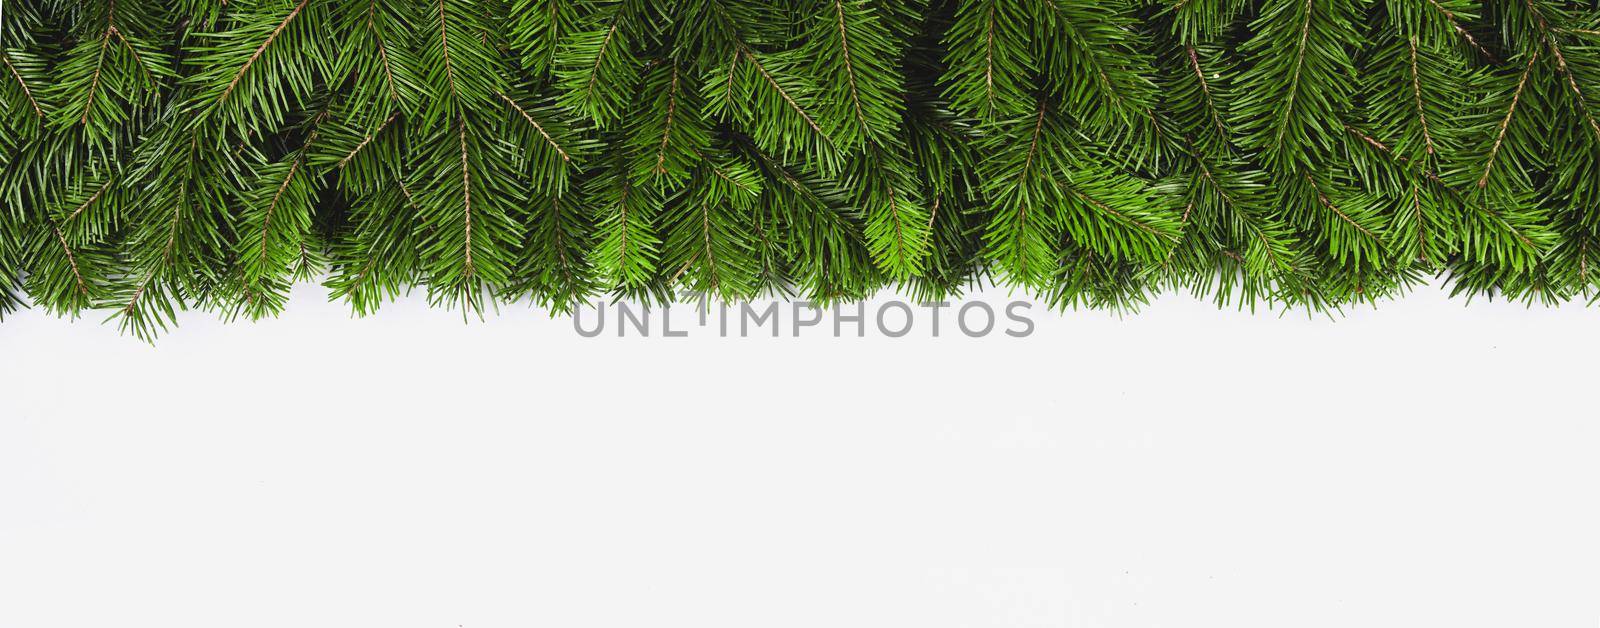 Christmas tree frame isolated on white by Yellowj